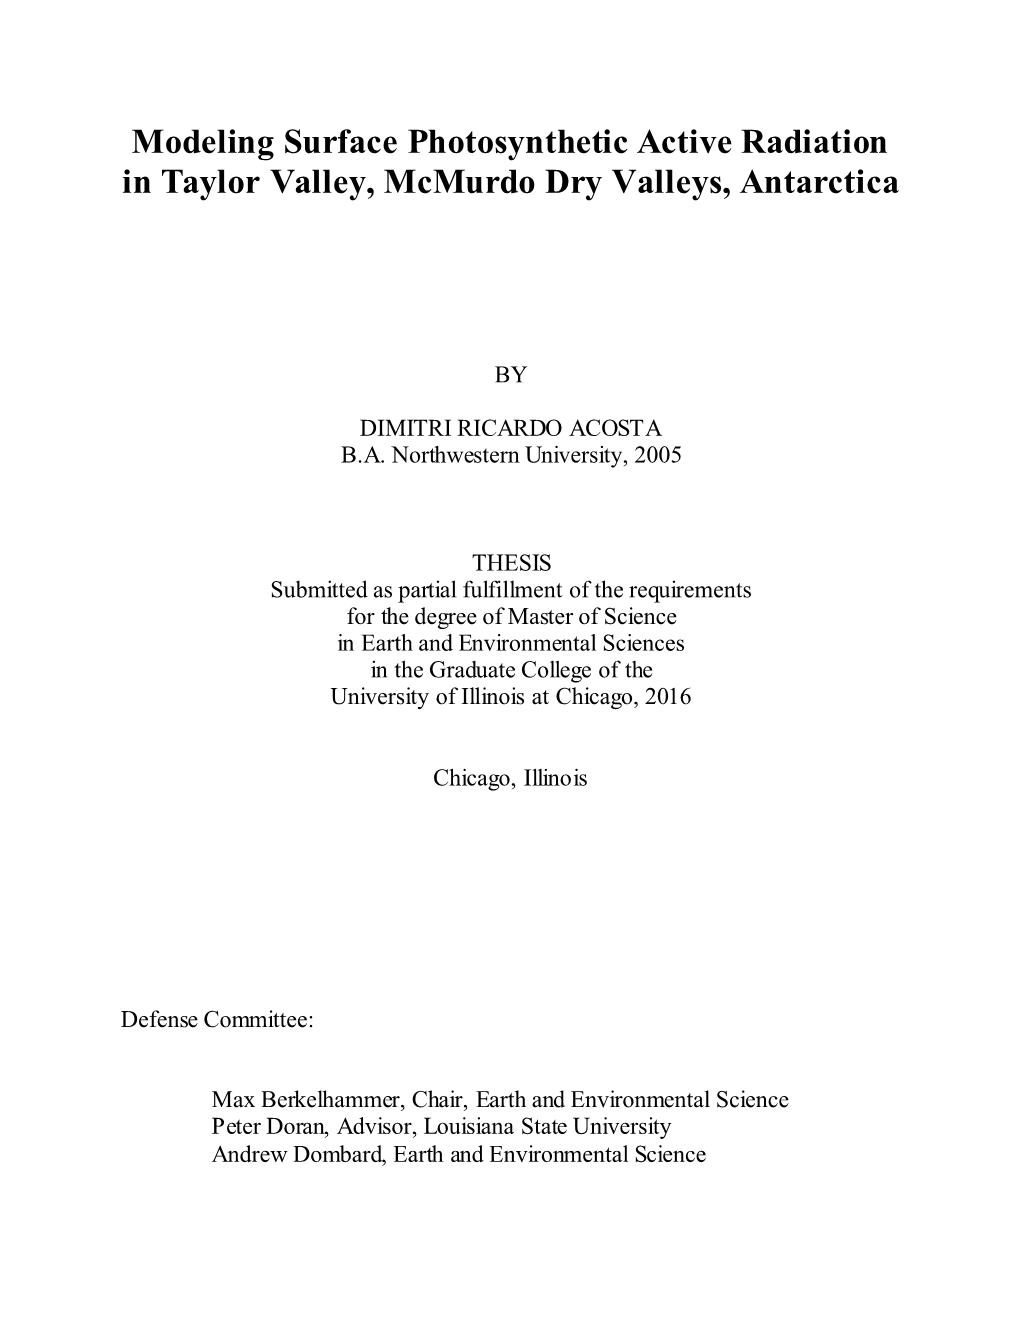 Modeling Surface Photosynthetic Active Radiation in Taylor Valley, Mcmurdo Dry Valleys, Antarctica